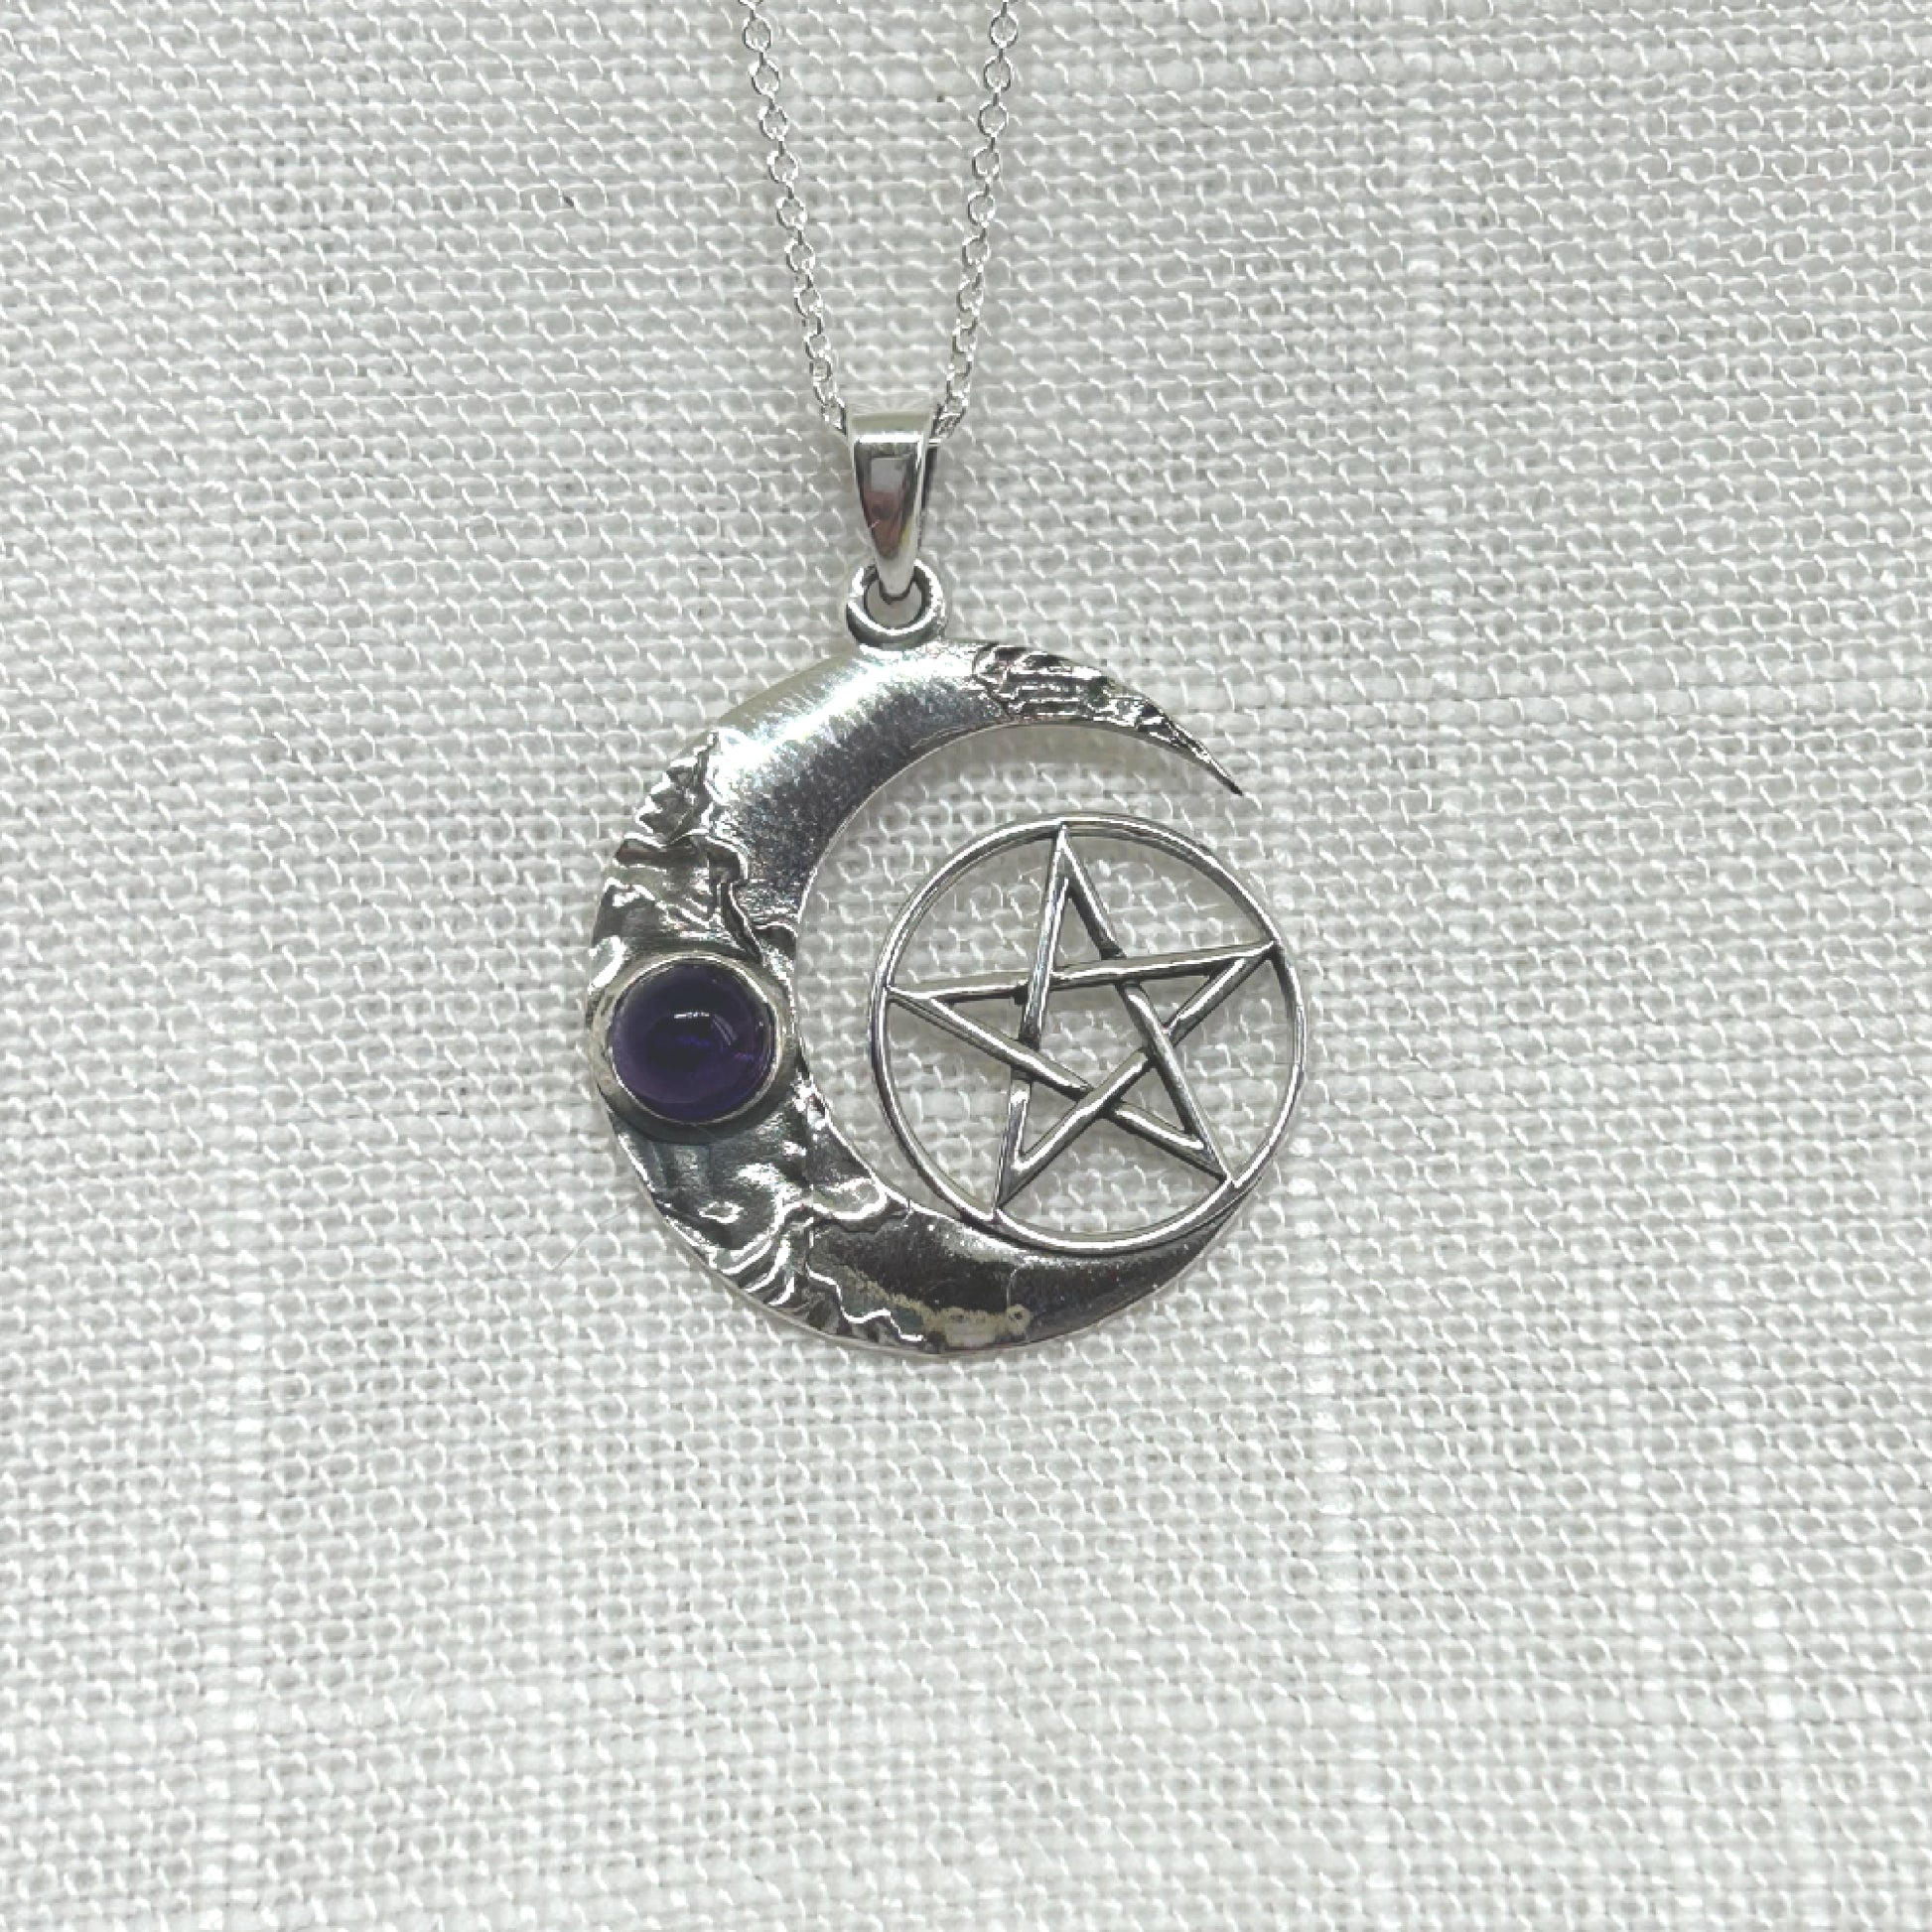 This beautiful, highly polished silver necklace features a crescent moon with an amethyst cabochon and a pentacle symbol.   Size approx: W: 2.4cm x H: 3.1cm including bale. Total weight is 4.8g  All pendants come supplied on an 20 inch .925 Silver Curb Chain and arrives in a tarnish proof bag inside a gift box.